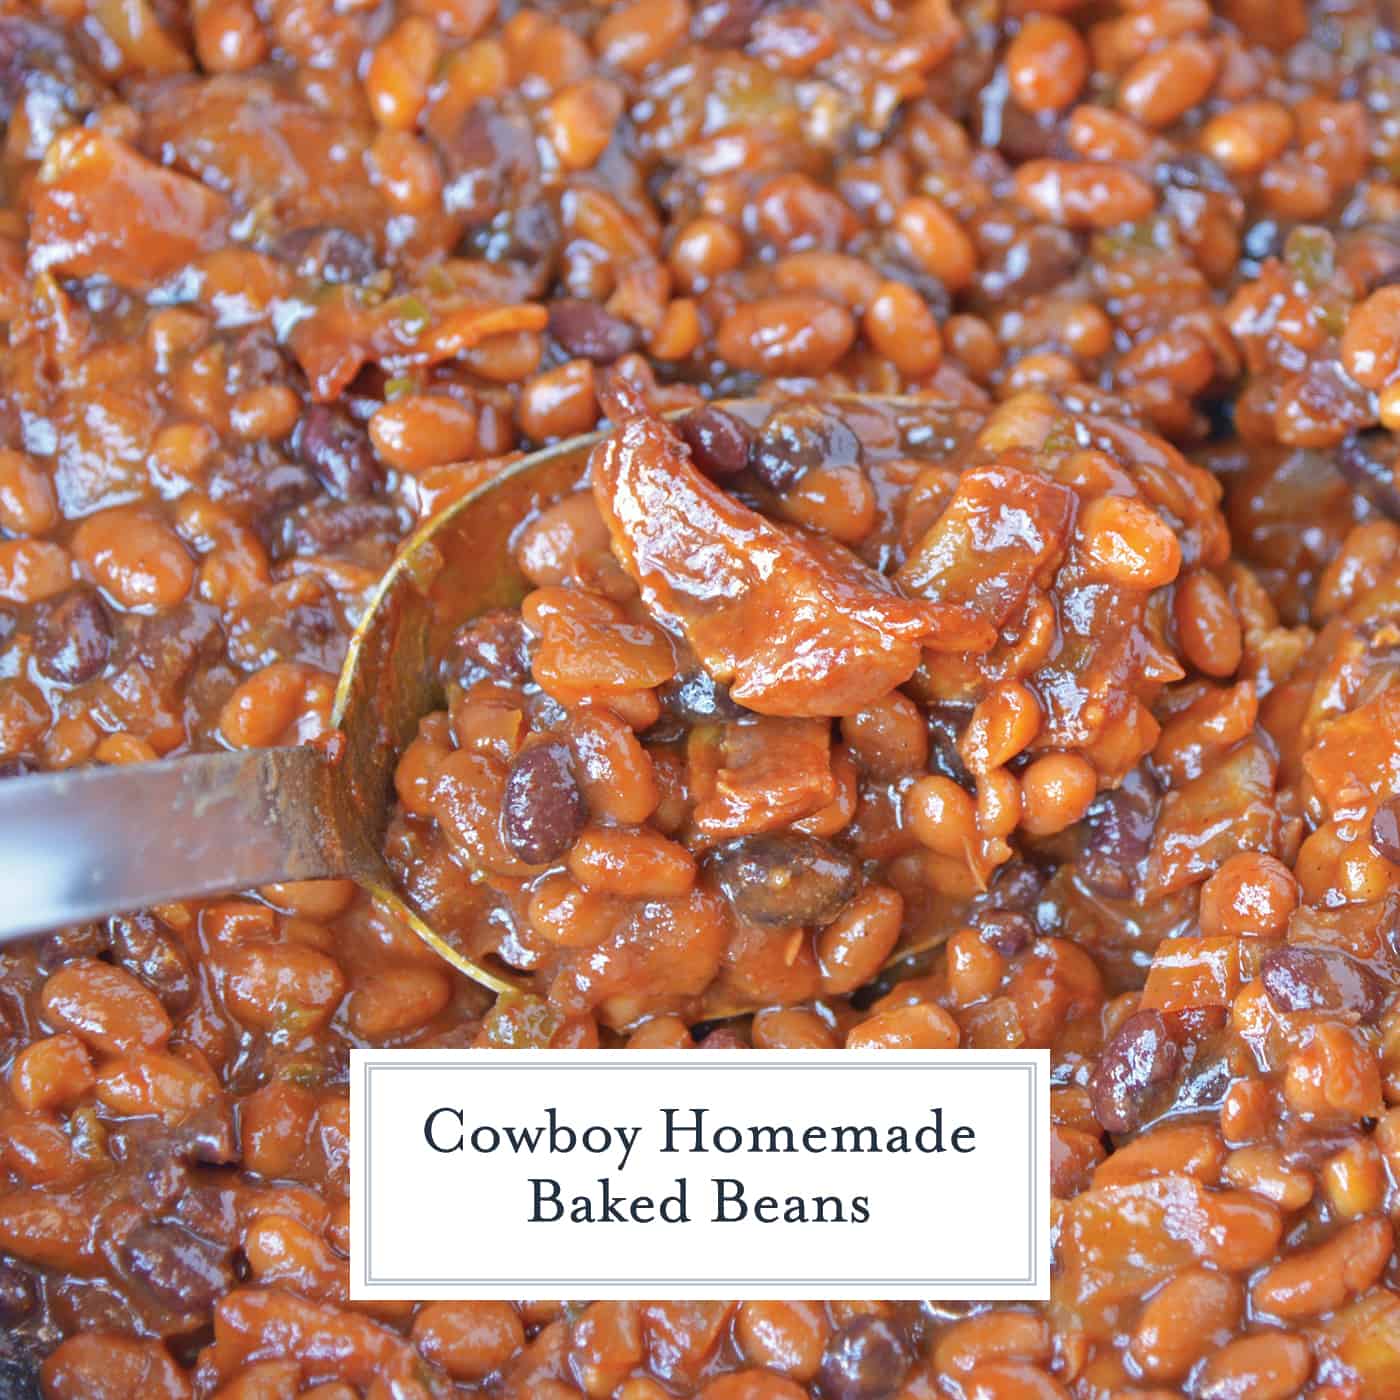 Cowboy Homemade Baked Beans are smoky, spicy and sweet. The perfect side dish recipe for BBQ, potlucks and parties. An easy baked bean recipe with loads of flavor! #homemadebakedbeans #bakedbeans www.savoryexperiments.com